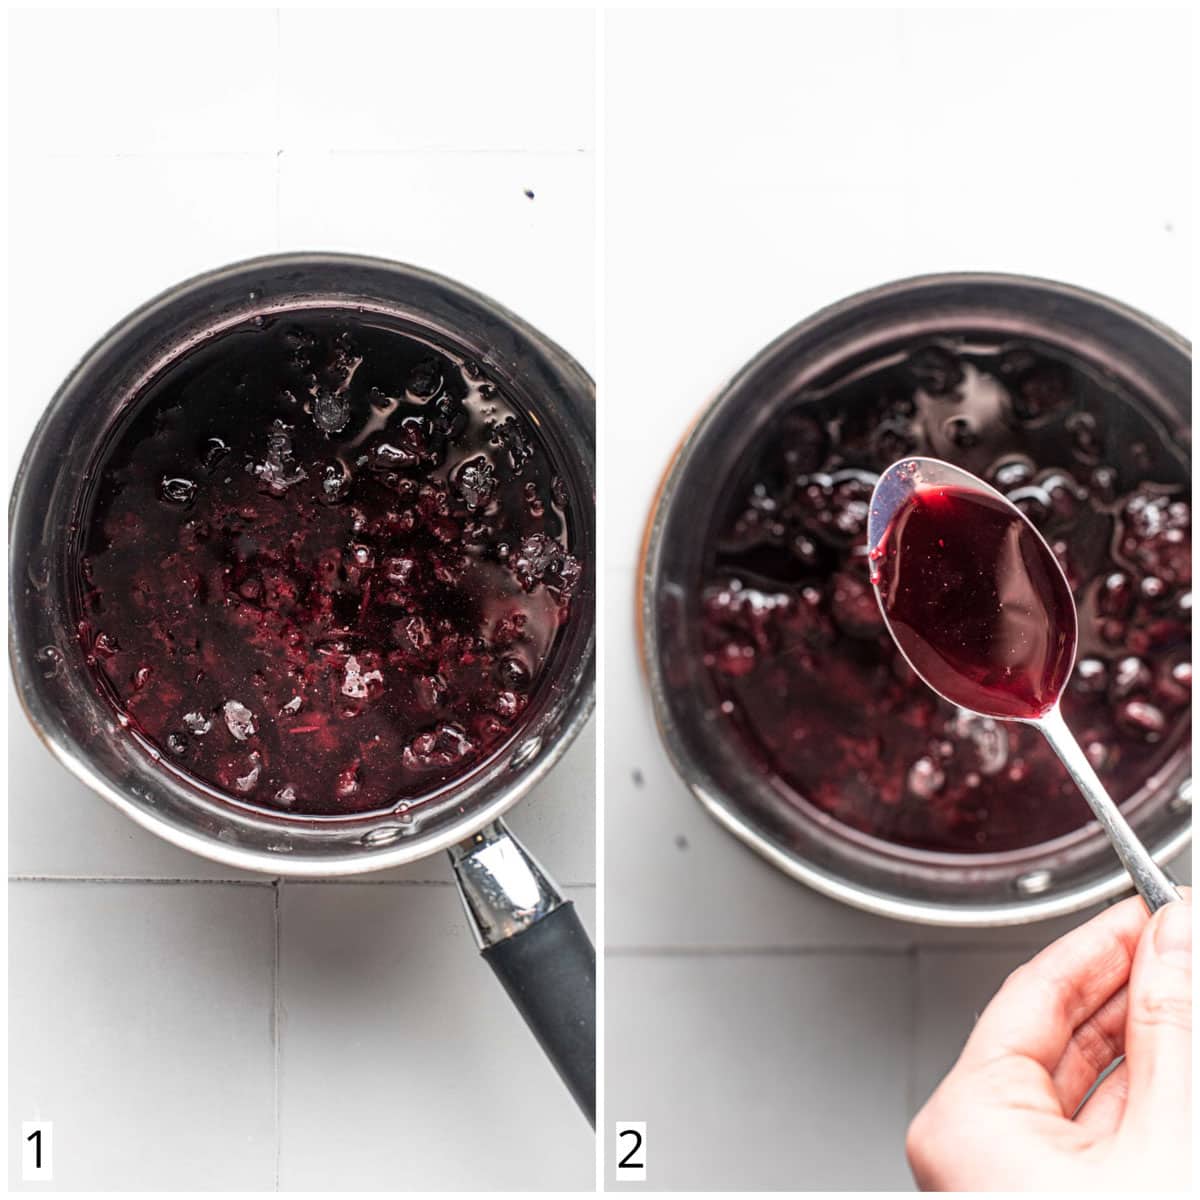 A collage of two images showing blueberry syrup being made.